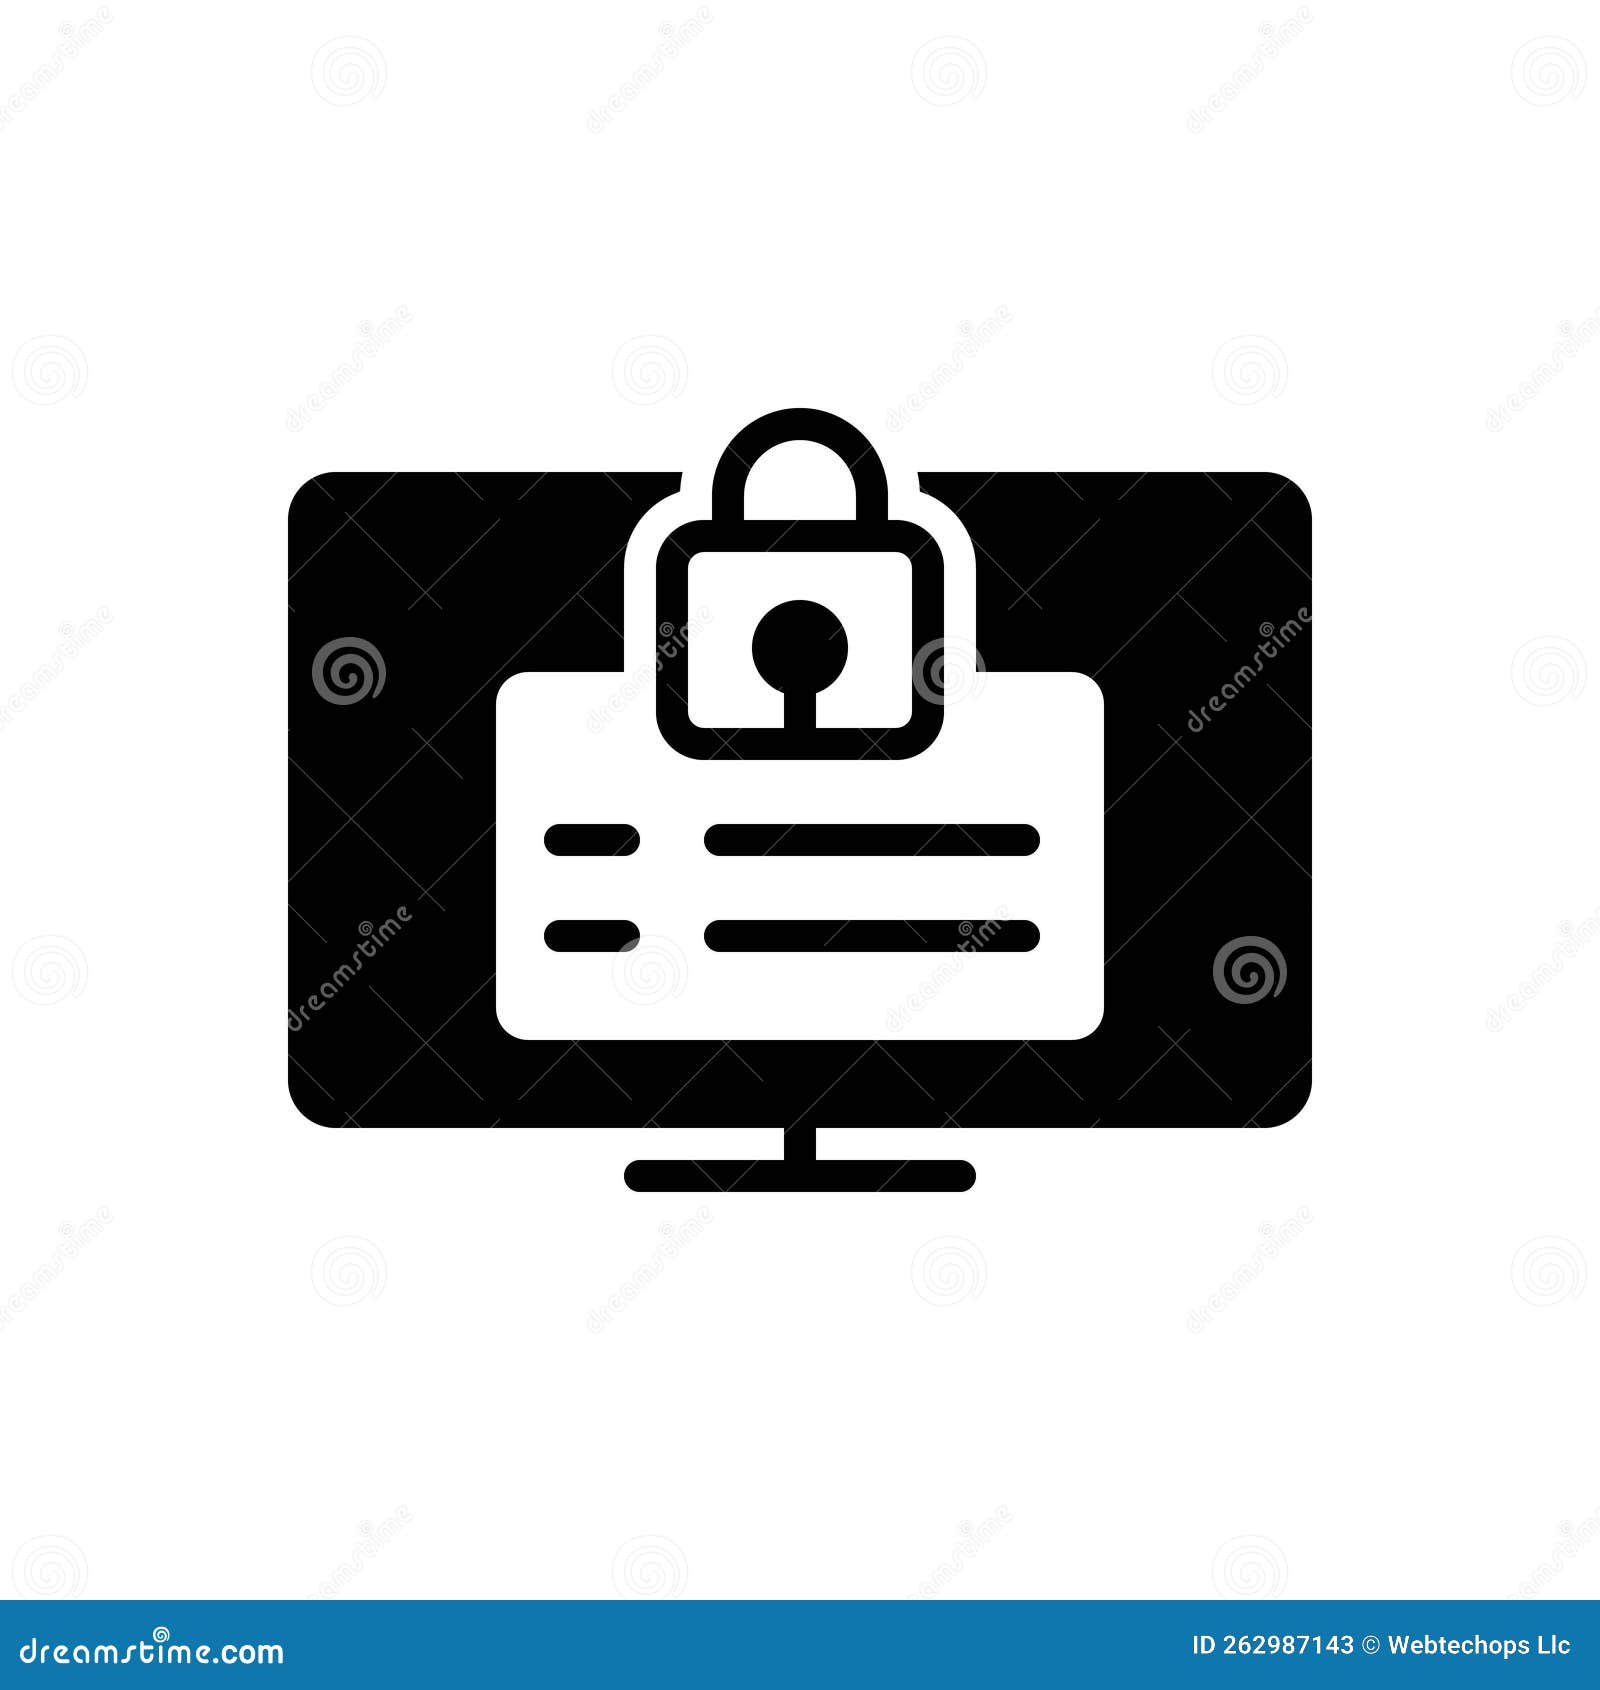 black solid icon for accessed, cyber security and security